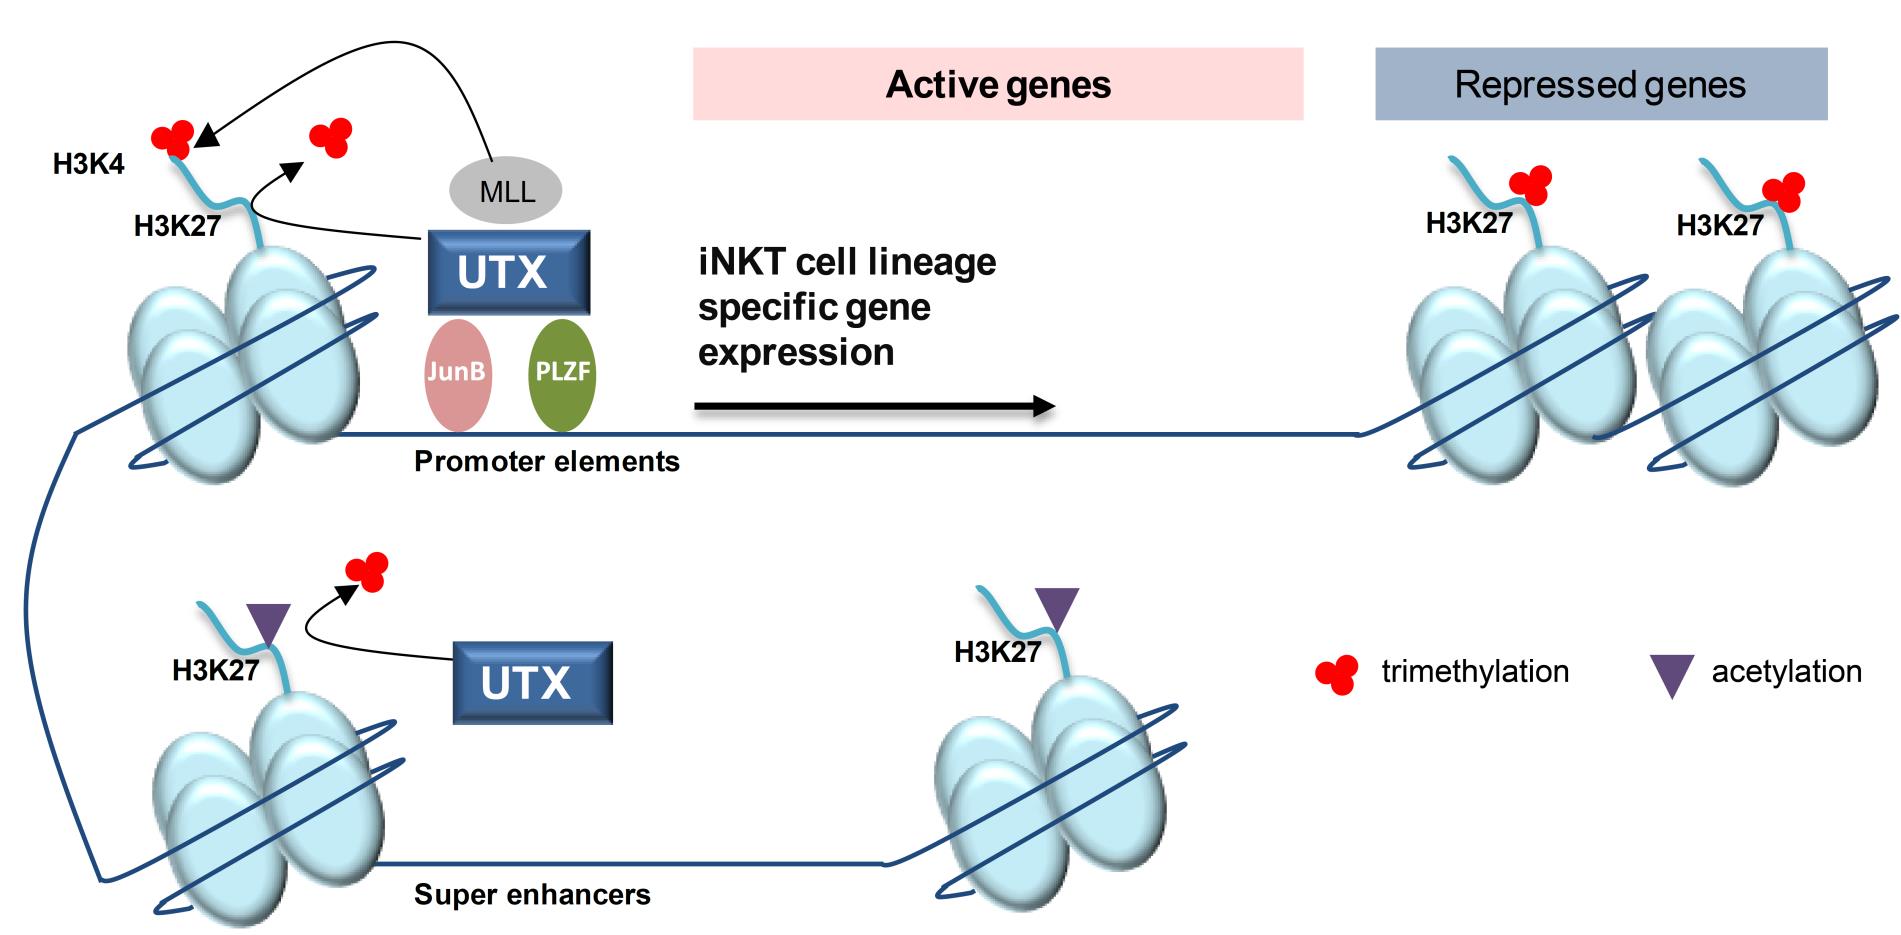 Winau Lab:Figure 2. UTX regulates the gene expression program of iNKT cells through multiple epigenetic mechanisms.  i) UTX is recruited to the promoters of signature genes of the iNKT cell lineage. Through its demethylase function, UTX removes repressive H3K27me3 marks from gene promoter regions. In parallel, UTX facilitates the formation of active H3K4me3 via its interaction with MLL. Subsequently, both histone modifications promote active transcription of iNKT cell genes. ii) Additionally, UTX is able to bind key iNKT transcription factors, such as PLZF and the newly identified JunB, which act on promoter elements to allow gene expression. iii) Finally, UTX facilitates the accessibility of super-enhancers in iNKT cells. UTX-mediated removal of repressive H3K27me3 marks favors the formation of H3K27ac associated with super-enhancers.